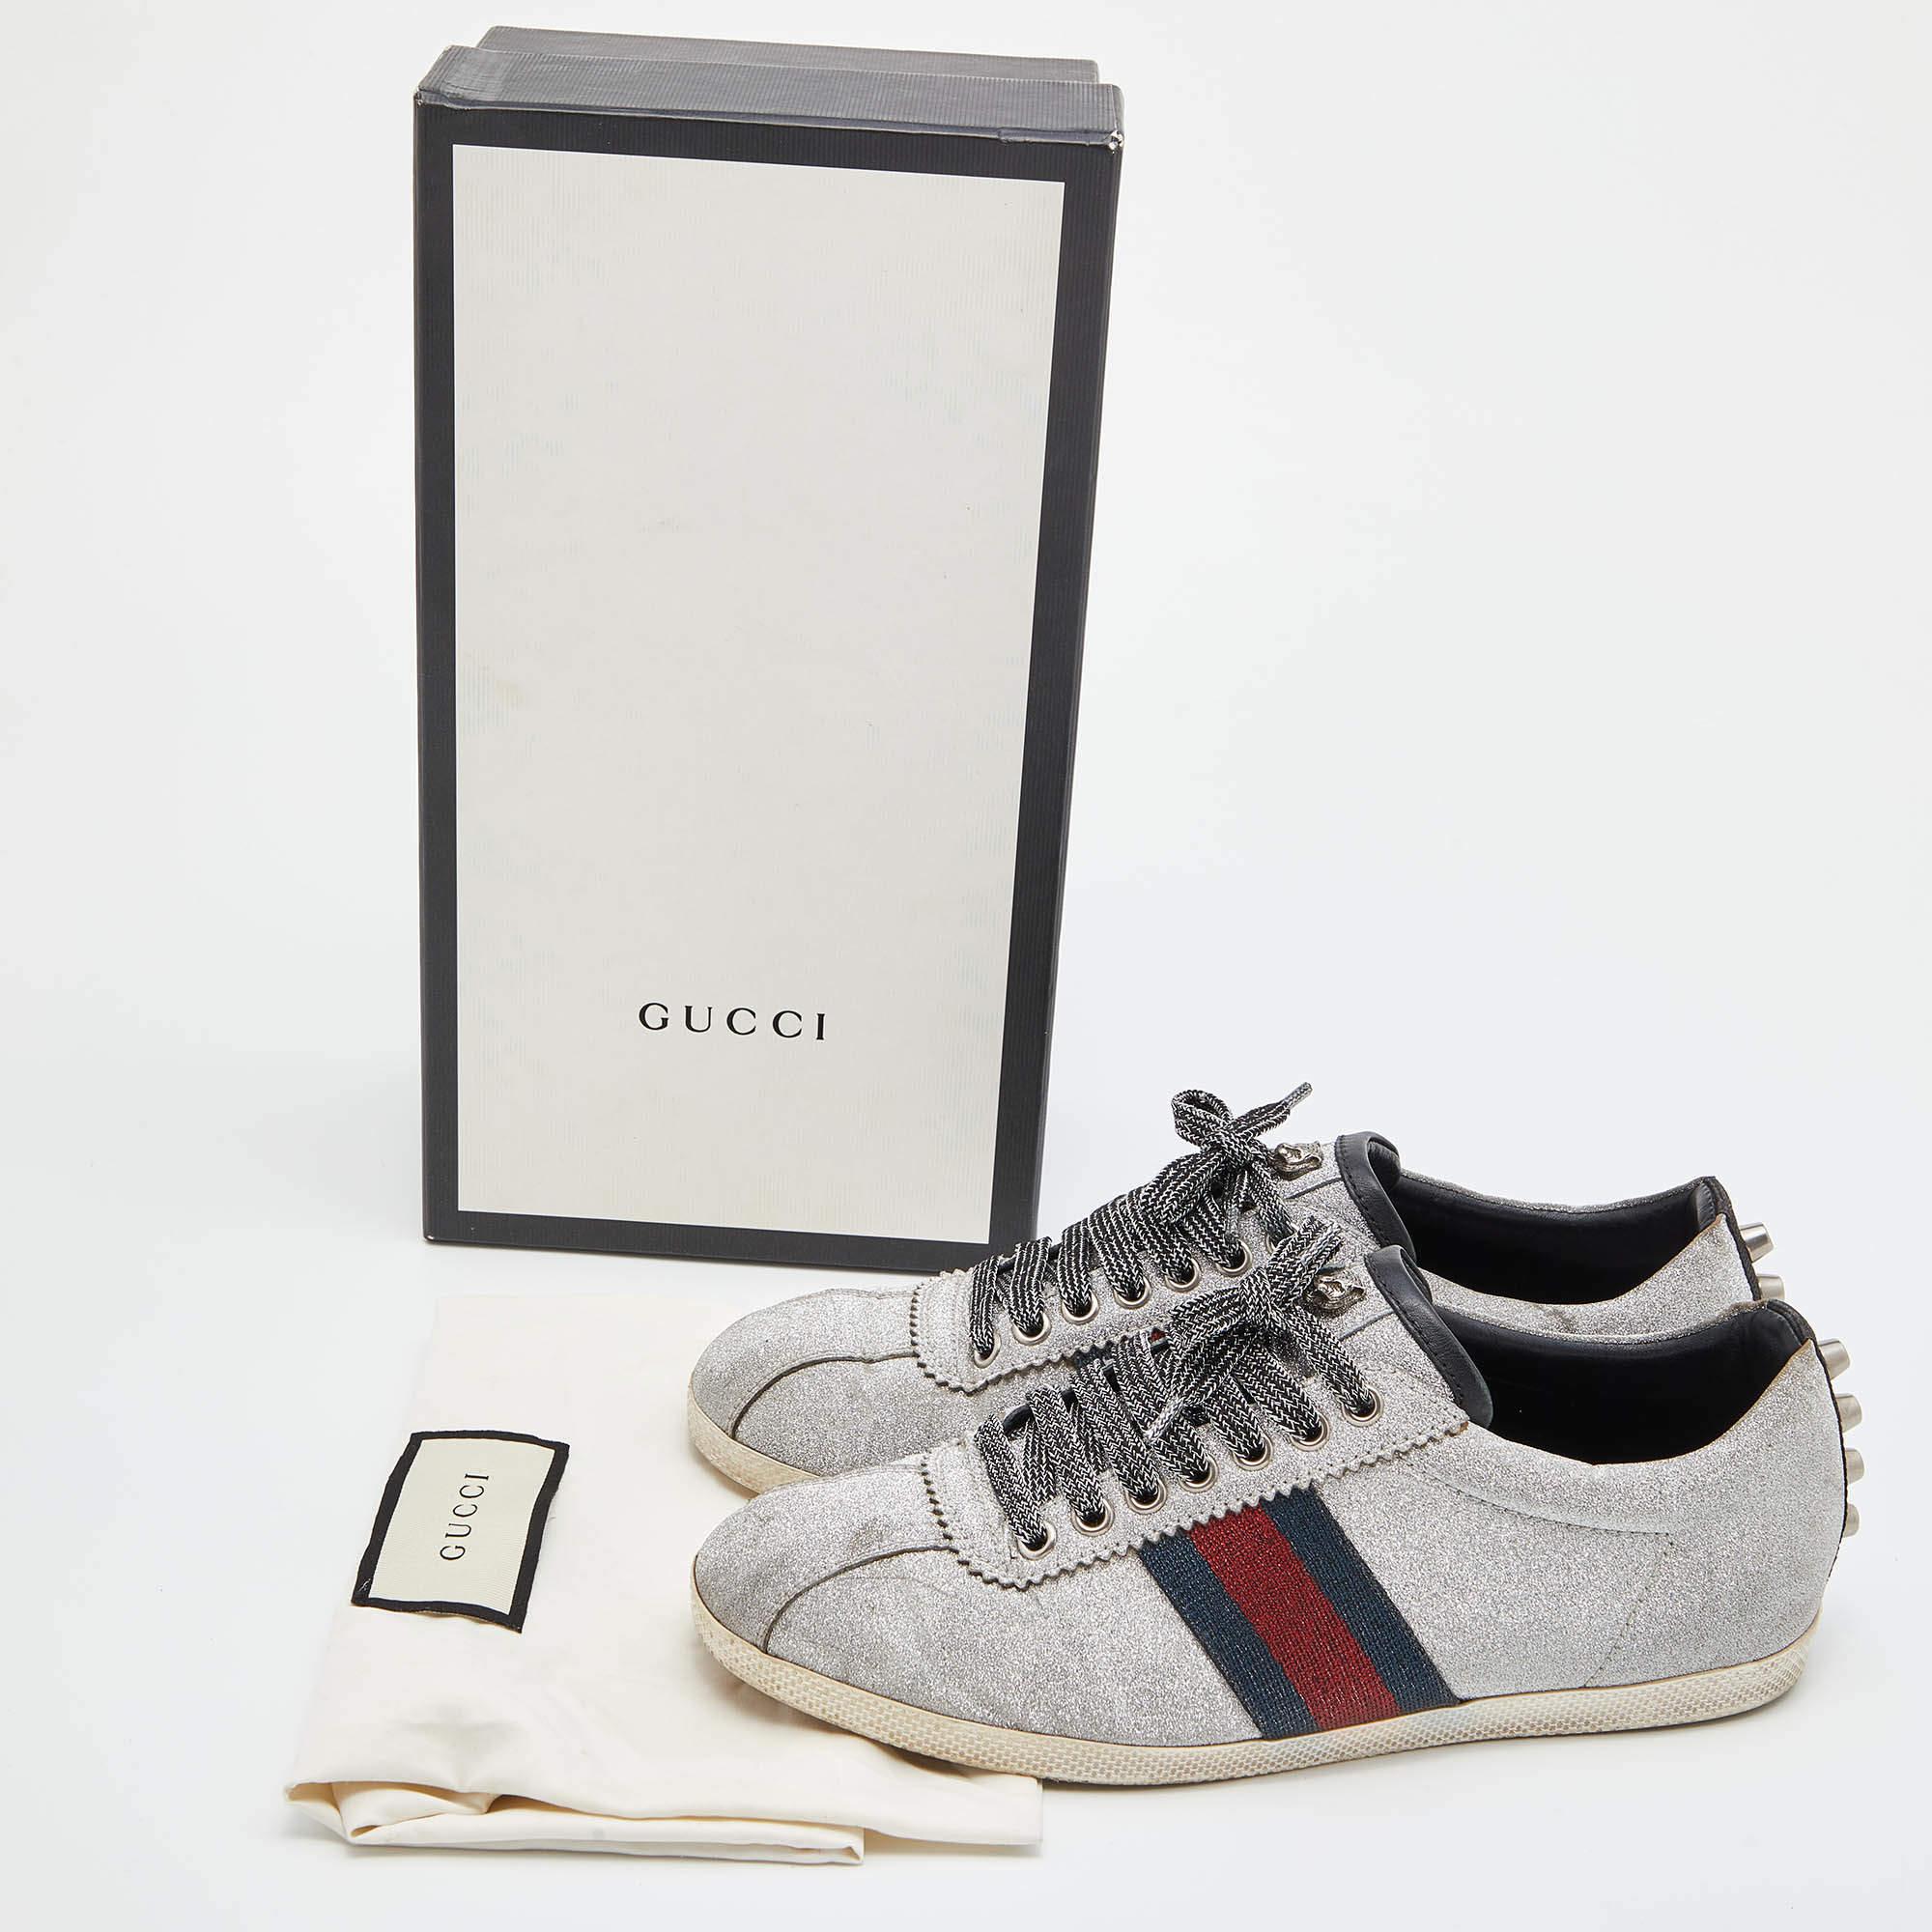 Gucci Metallic Silver Glitter Bambi Web Detail Studded Low Top Sneakers Size 38 For Sale 5